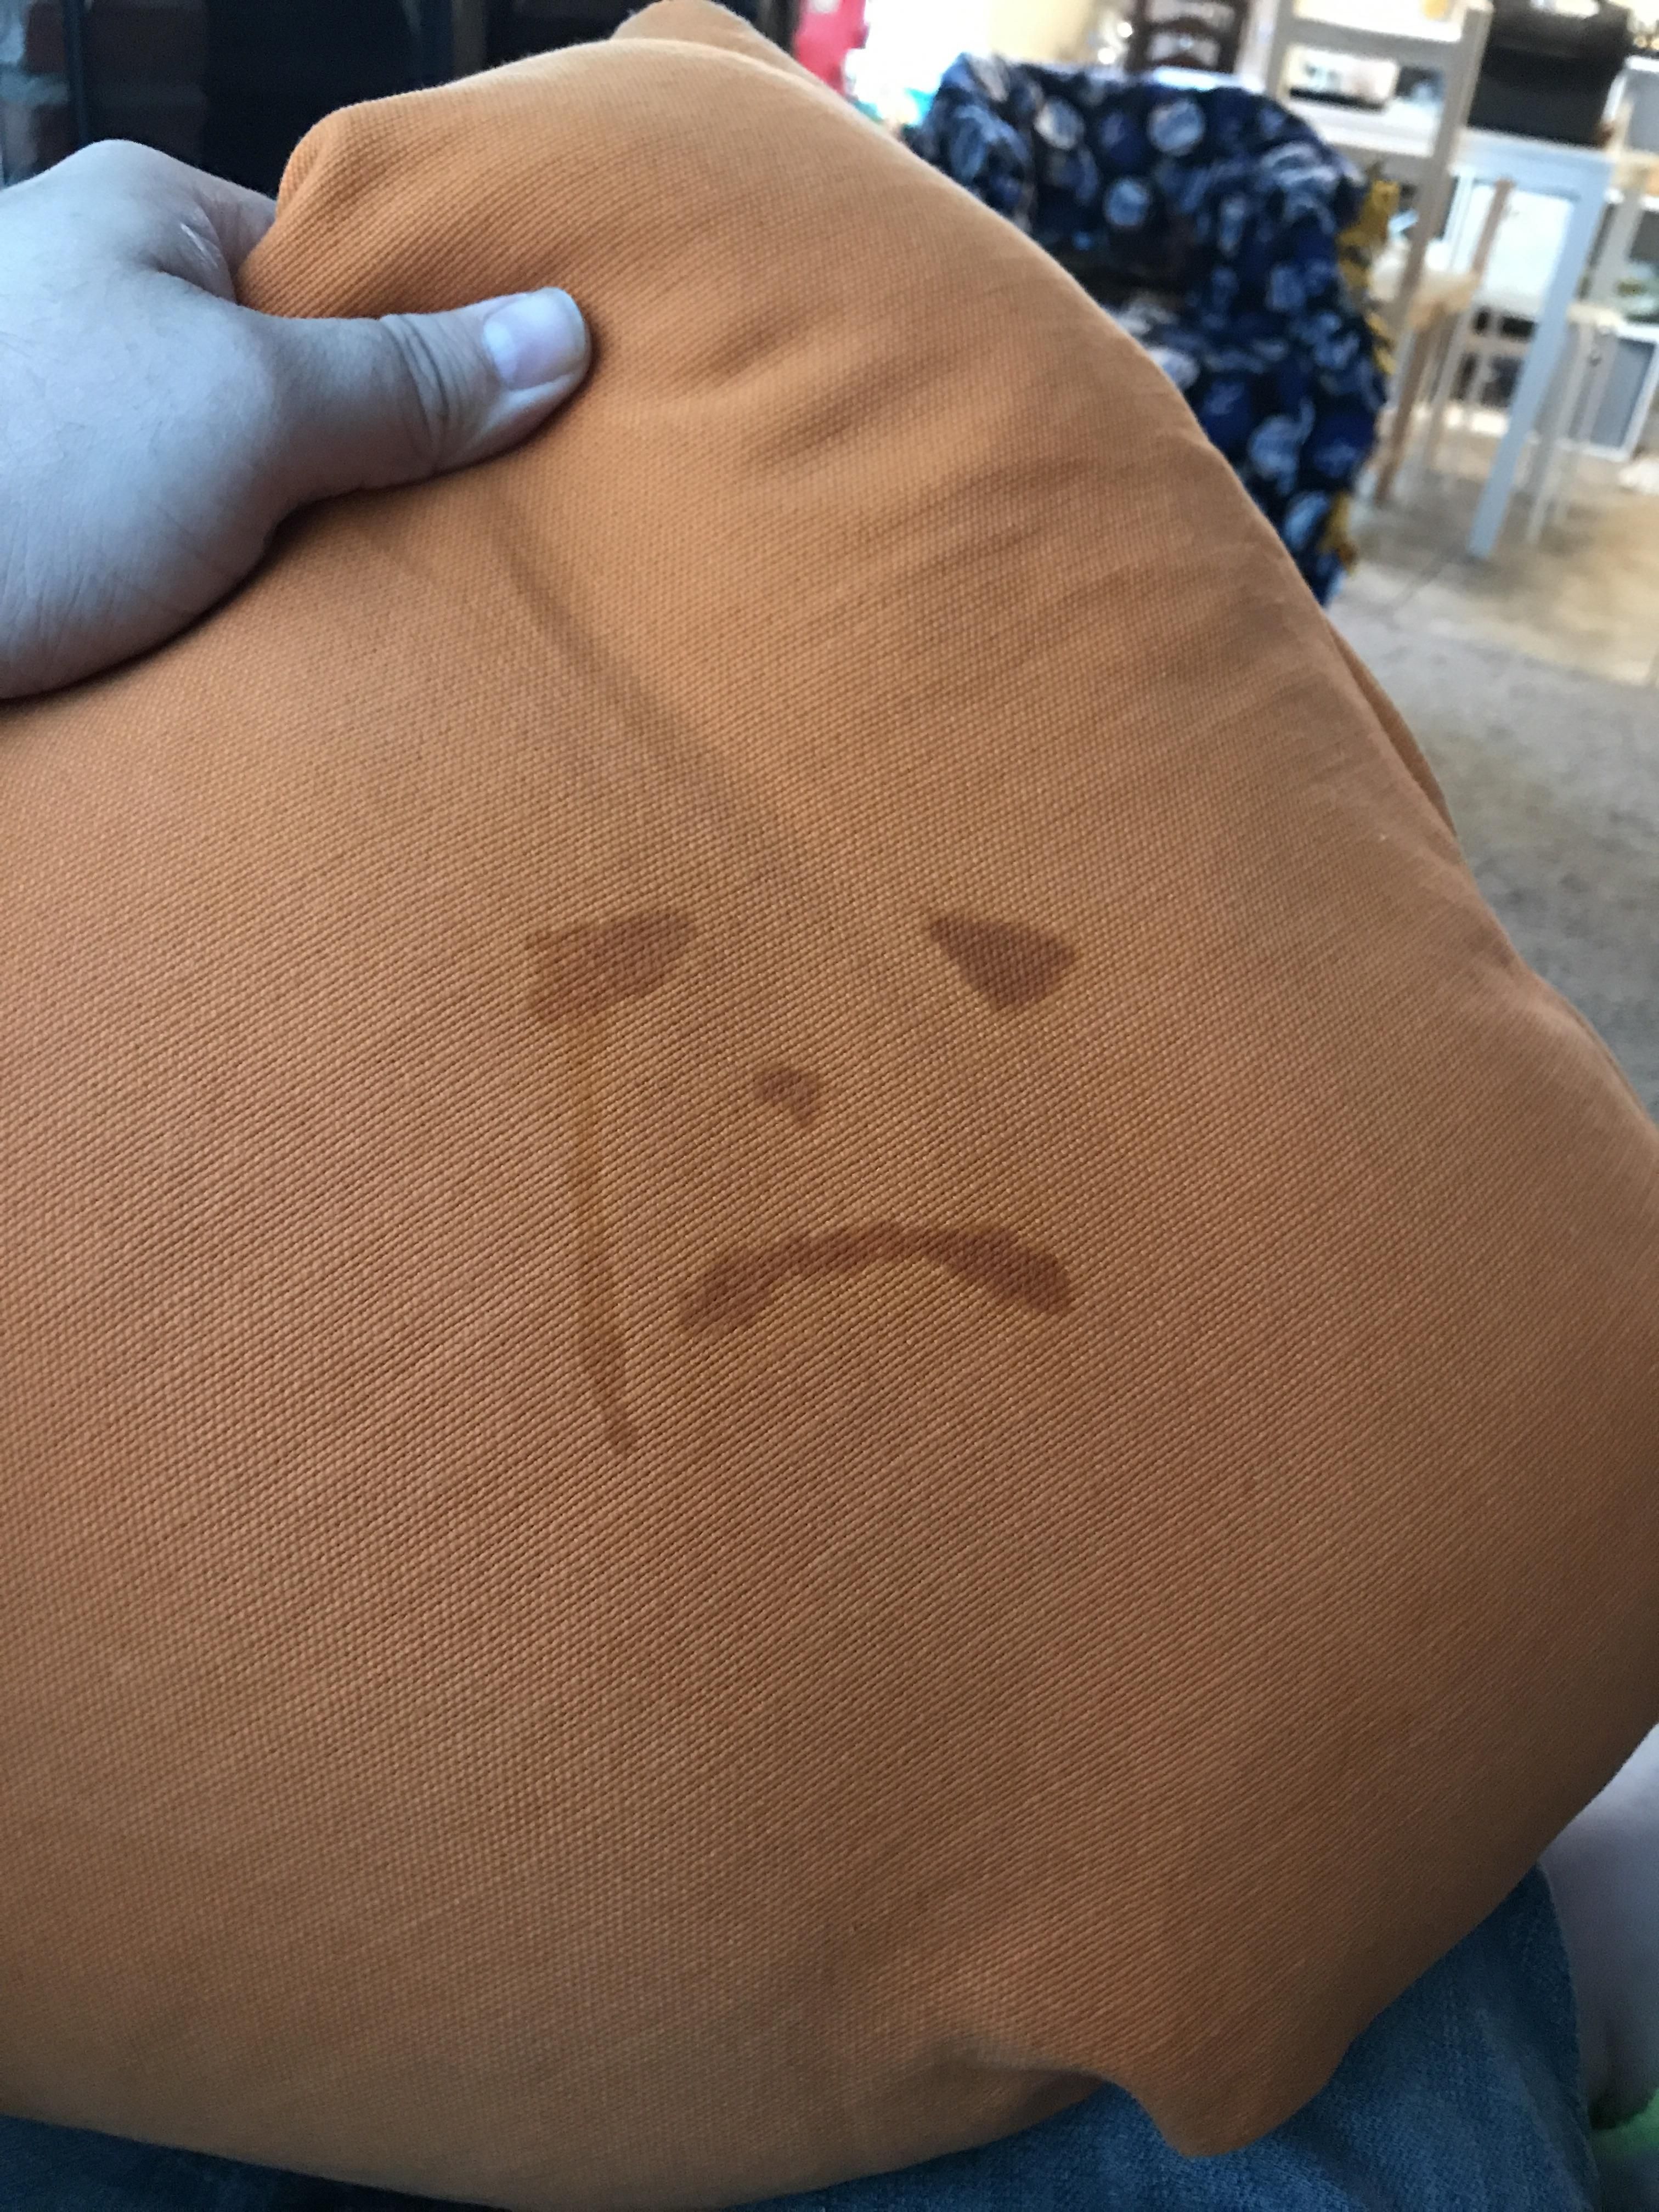 My daughter was crying because she didn't behave well enough to do fireworks tonight and she buried her face in this pillow. This is how it looked when she lifted her head.